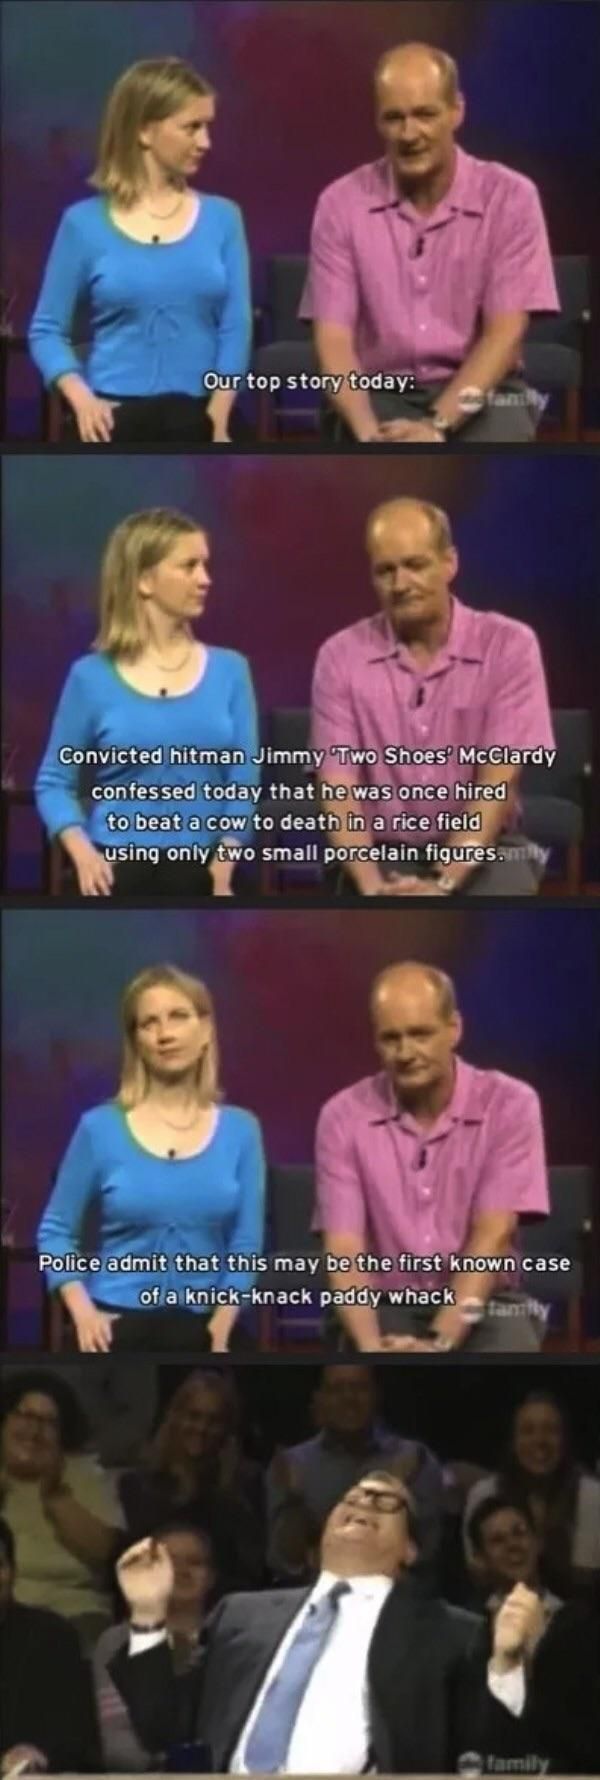 Colin Mochrie at his finest